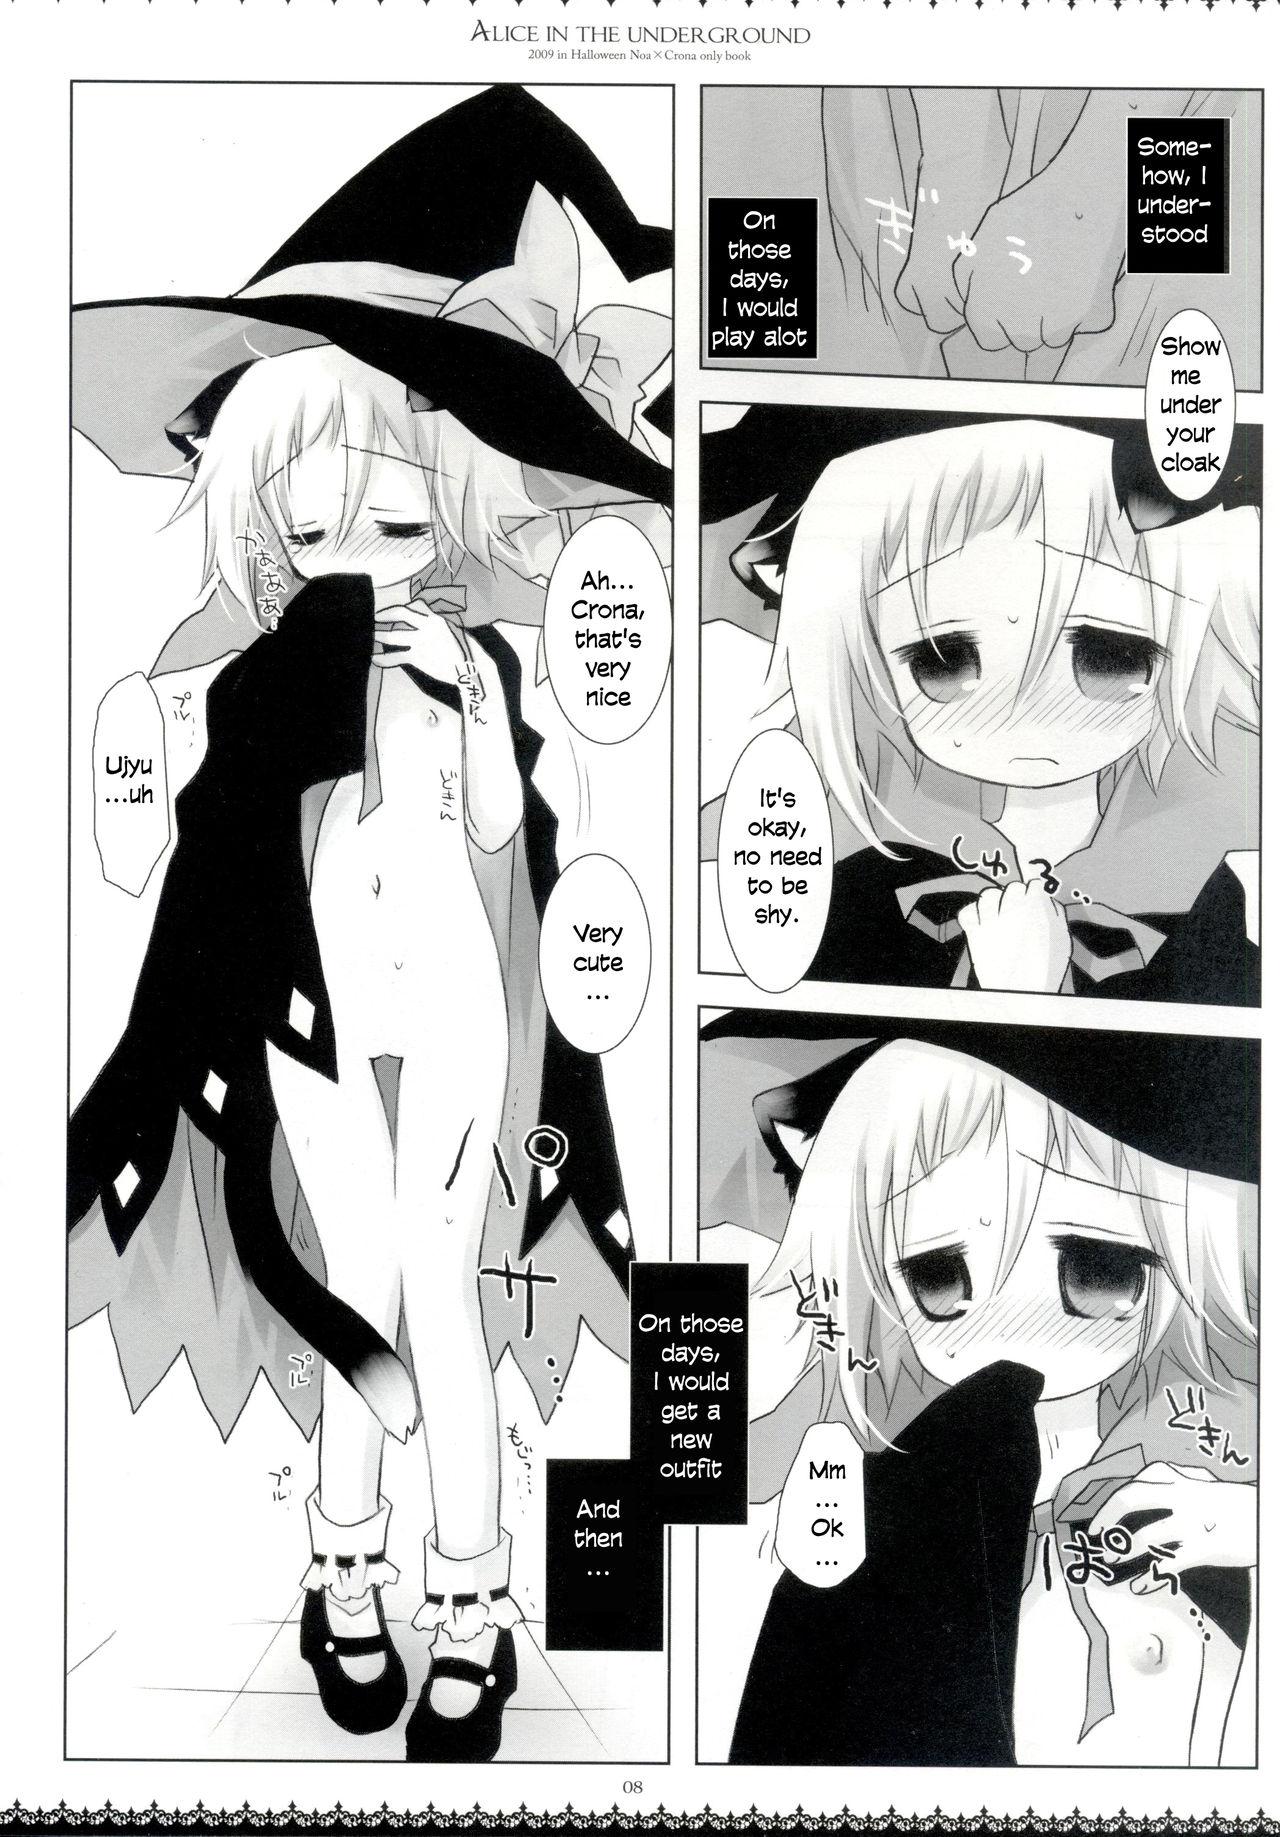 Plumper Alice in the underground - Soul eater Celebrity Porn - Page 7